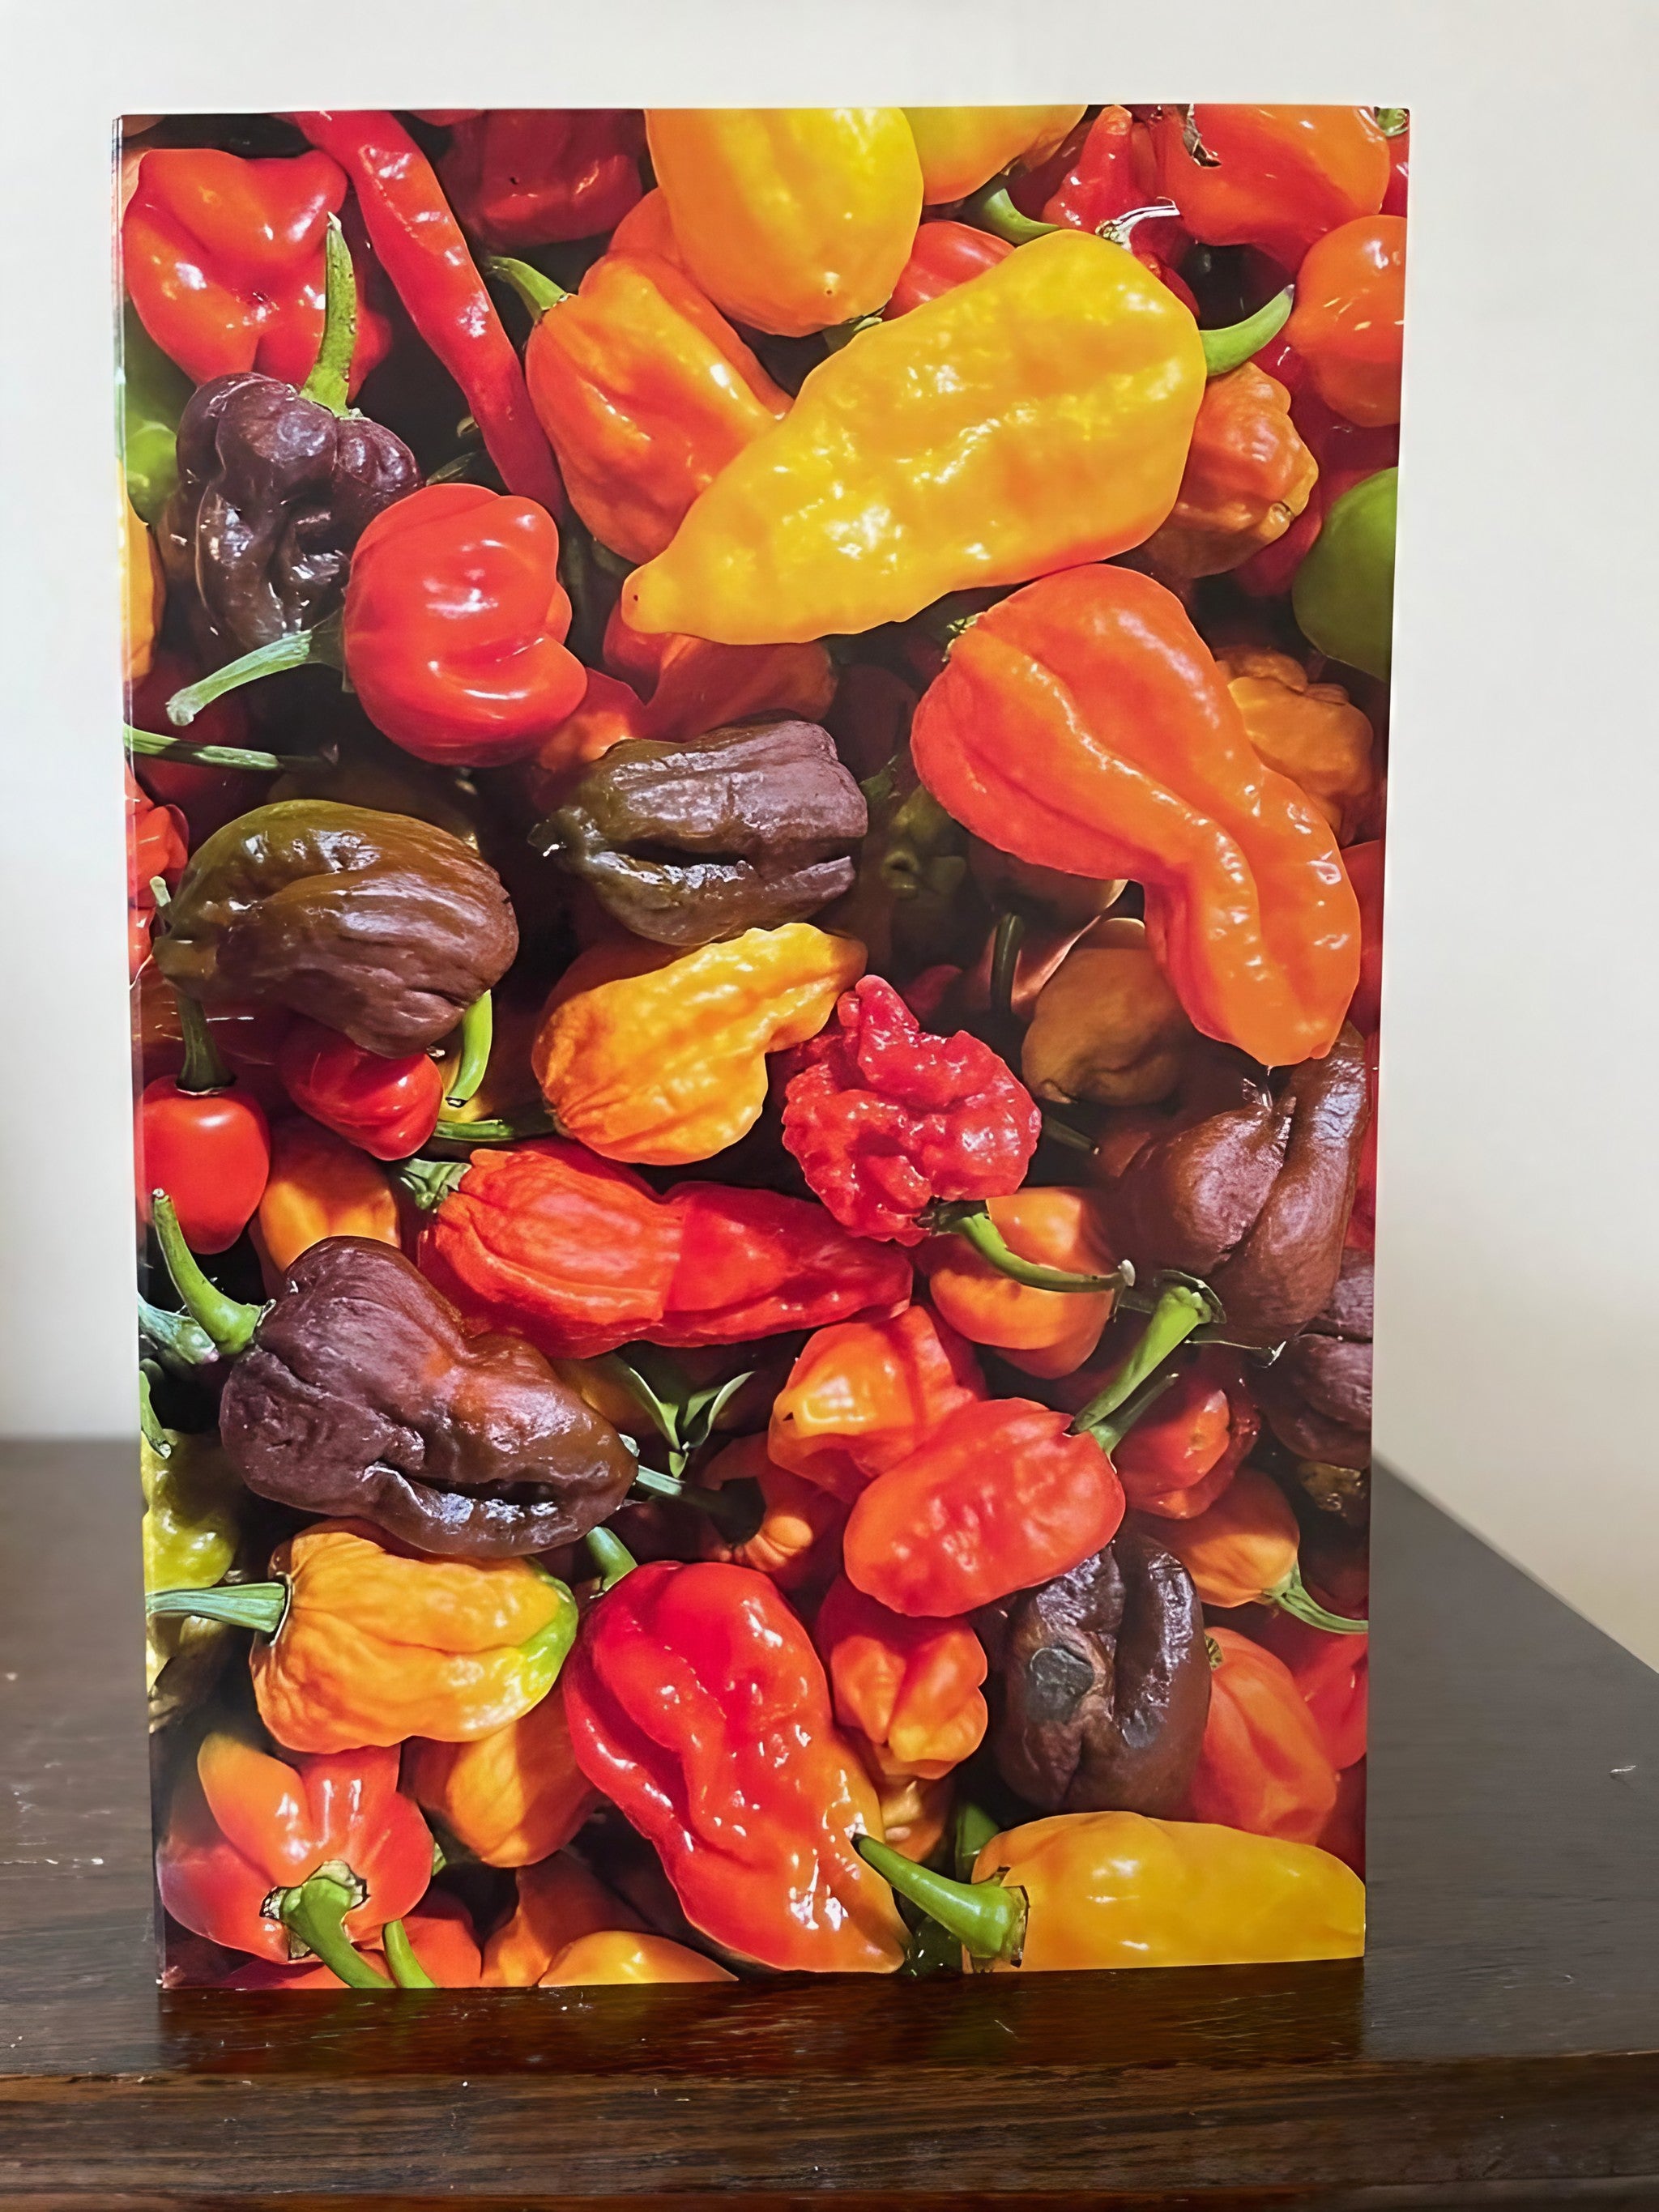 A greeting card from the collection showcasing an illustration of chillies